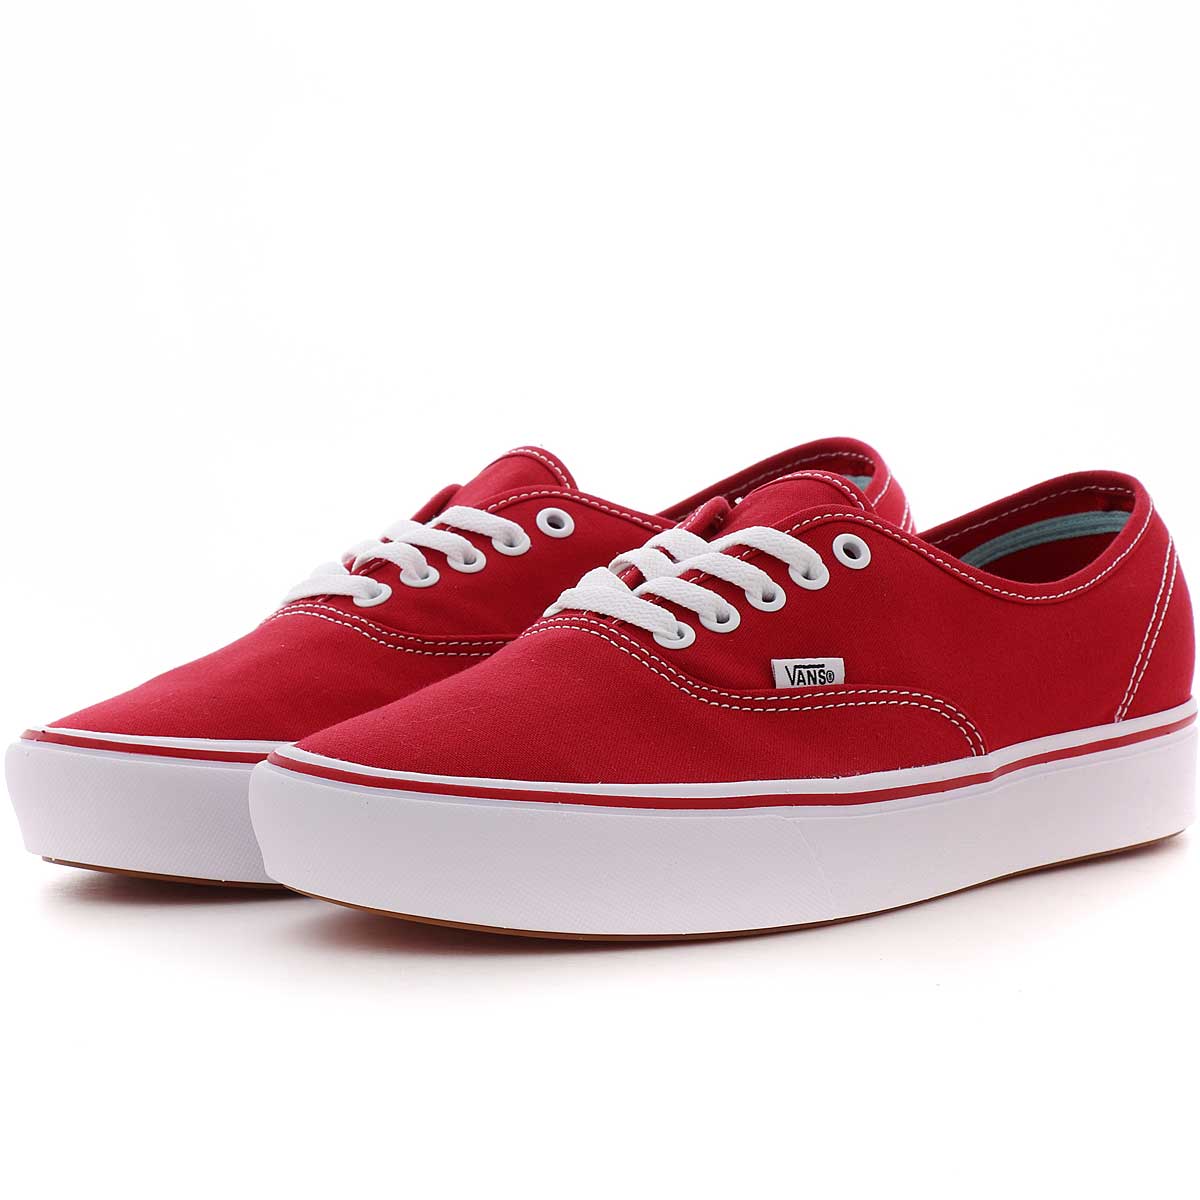 red and white classic vans